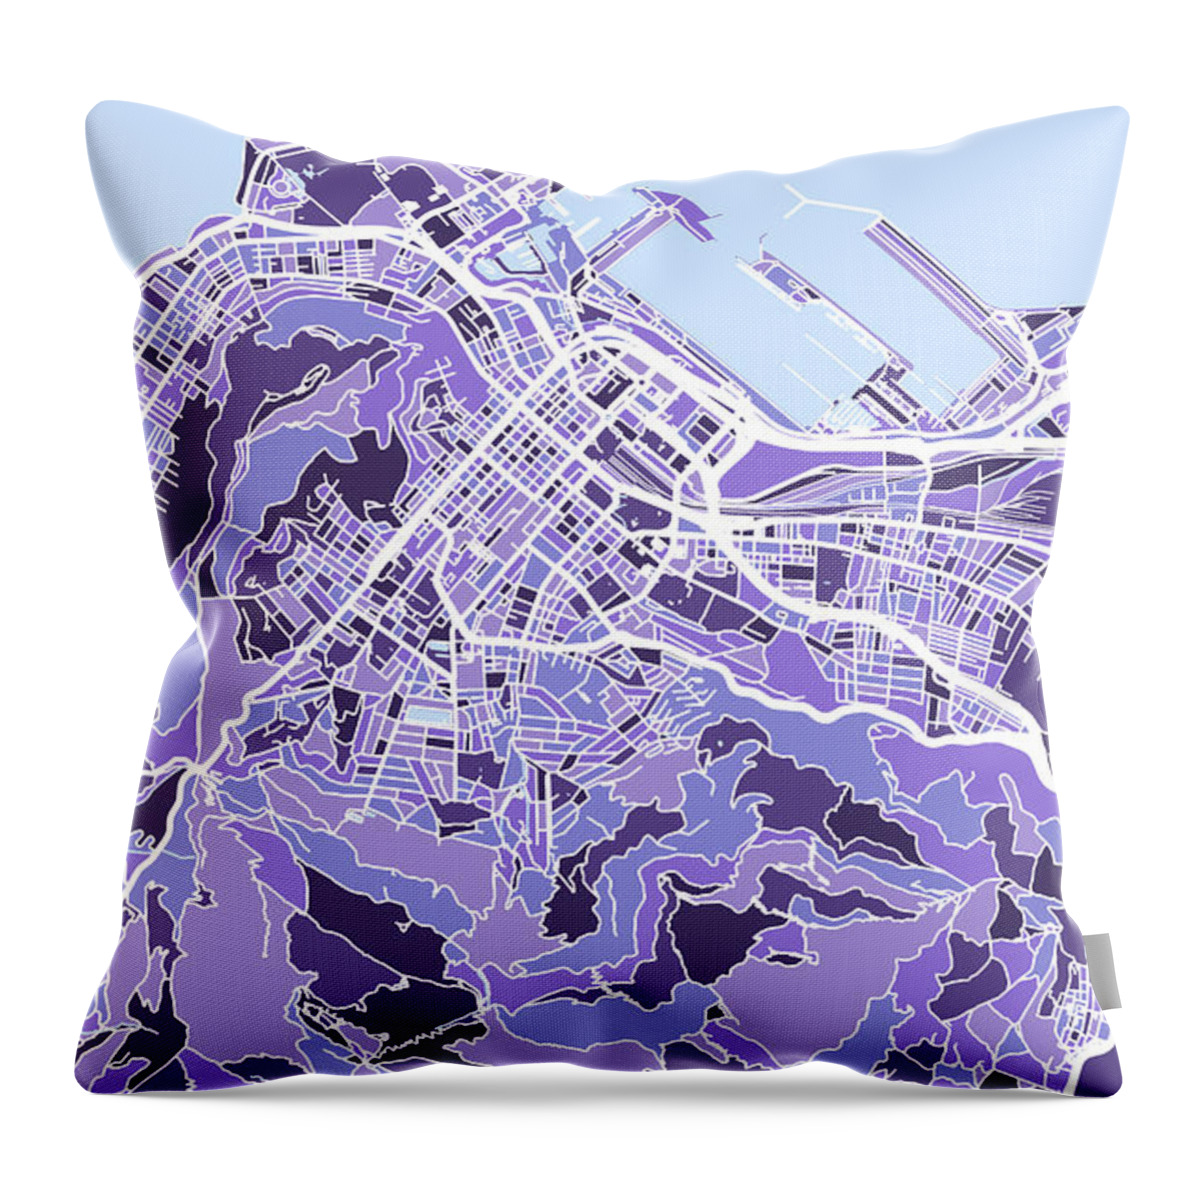 Cape Town Throw Pillow featuring the digital art Cape Town South Africa City Street Map by Michael Tompsett